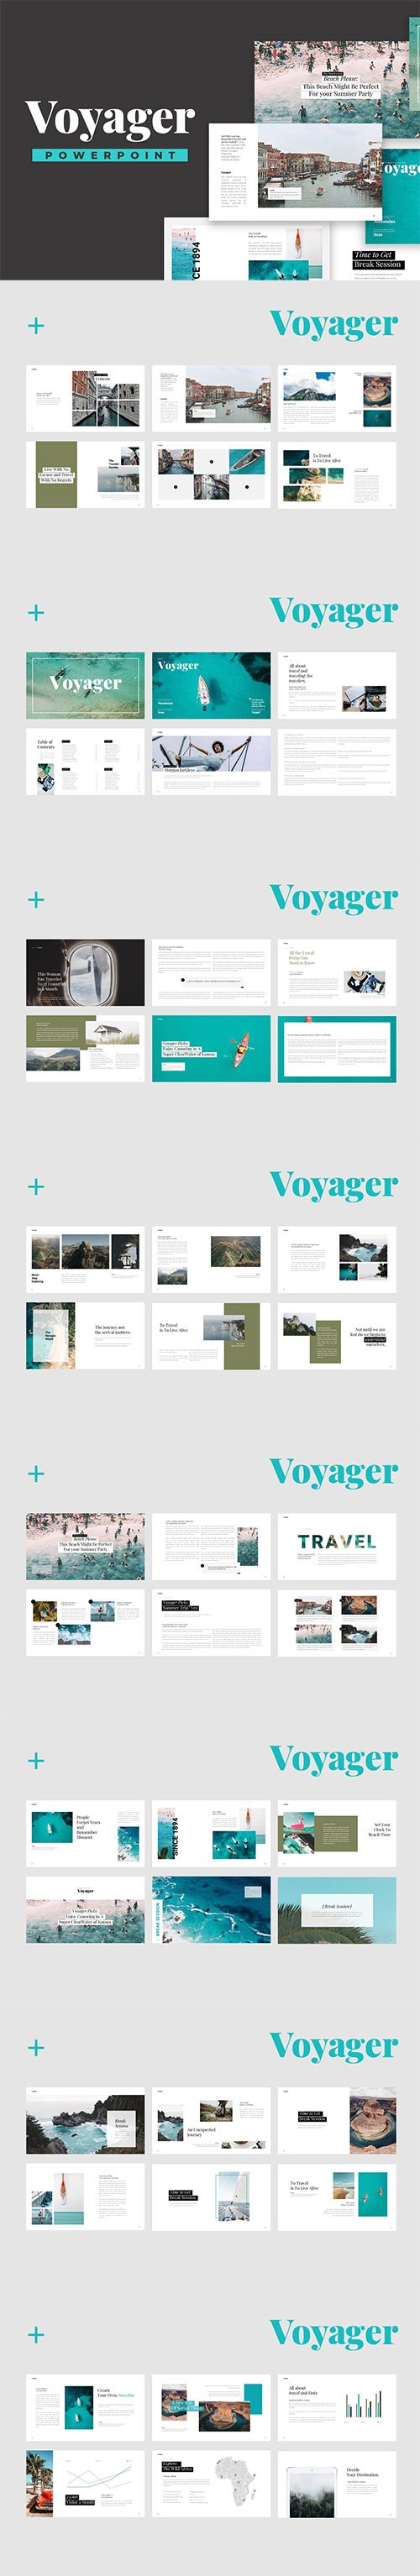 Voyager Powerpoint